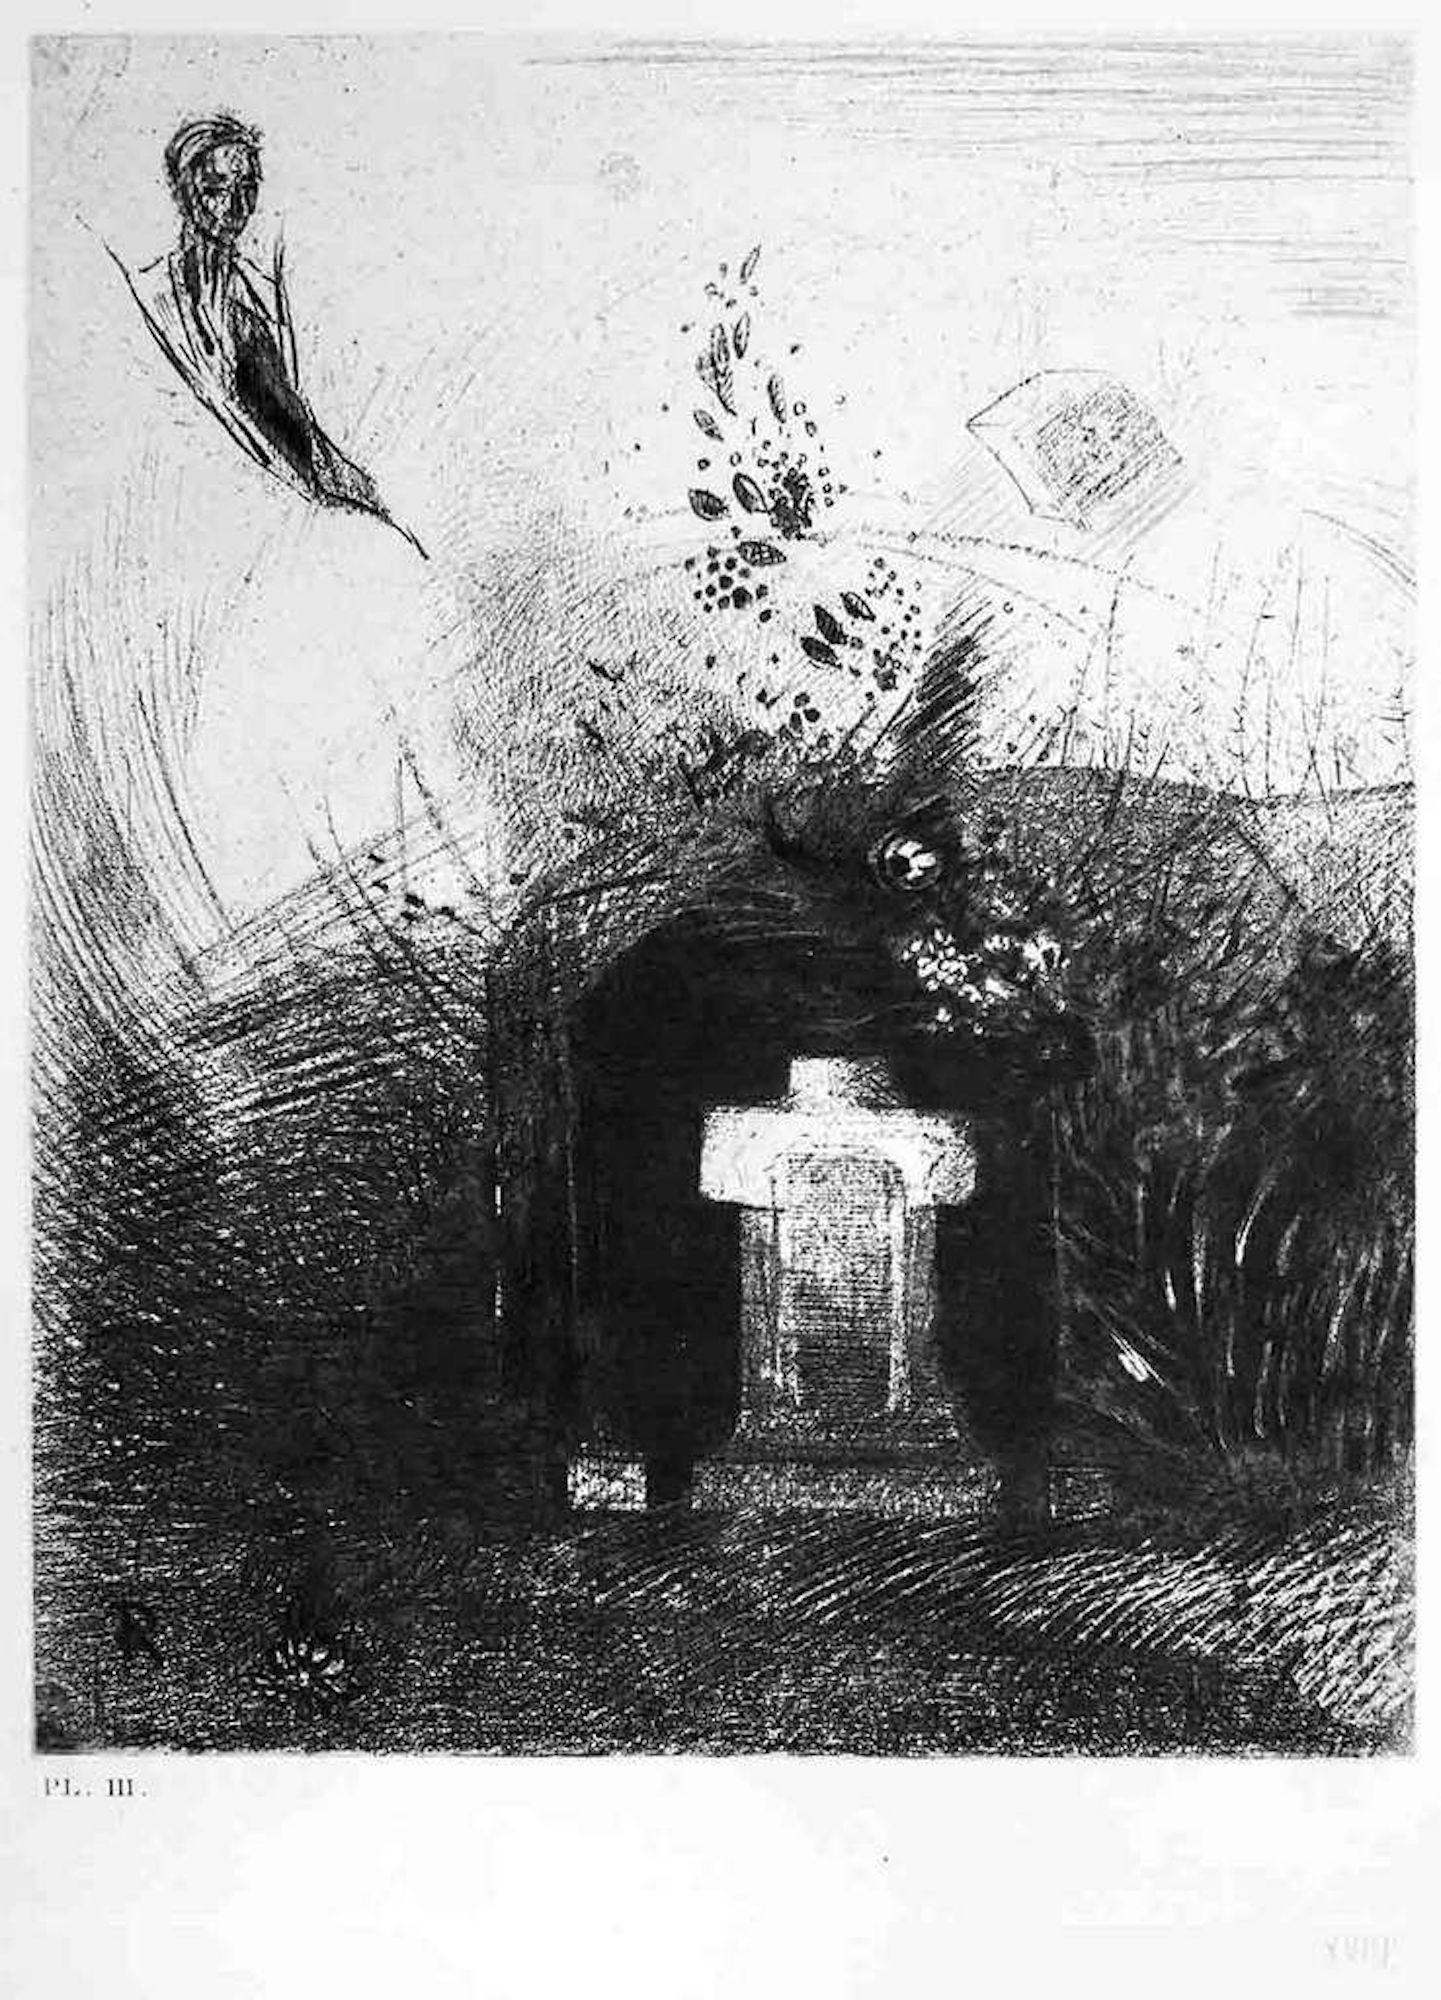 Illustration from the series "Les Fleurs du mal" - Etching After O. Redon